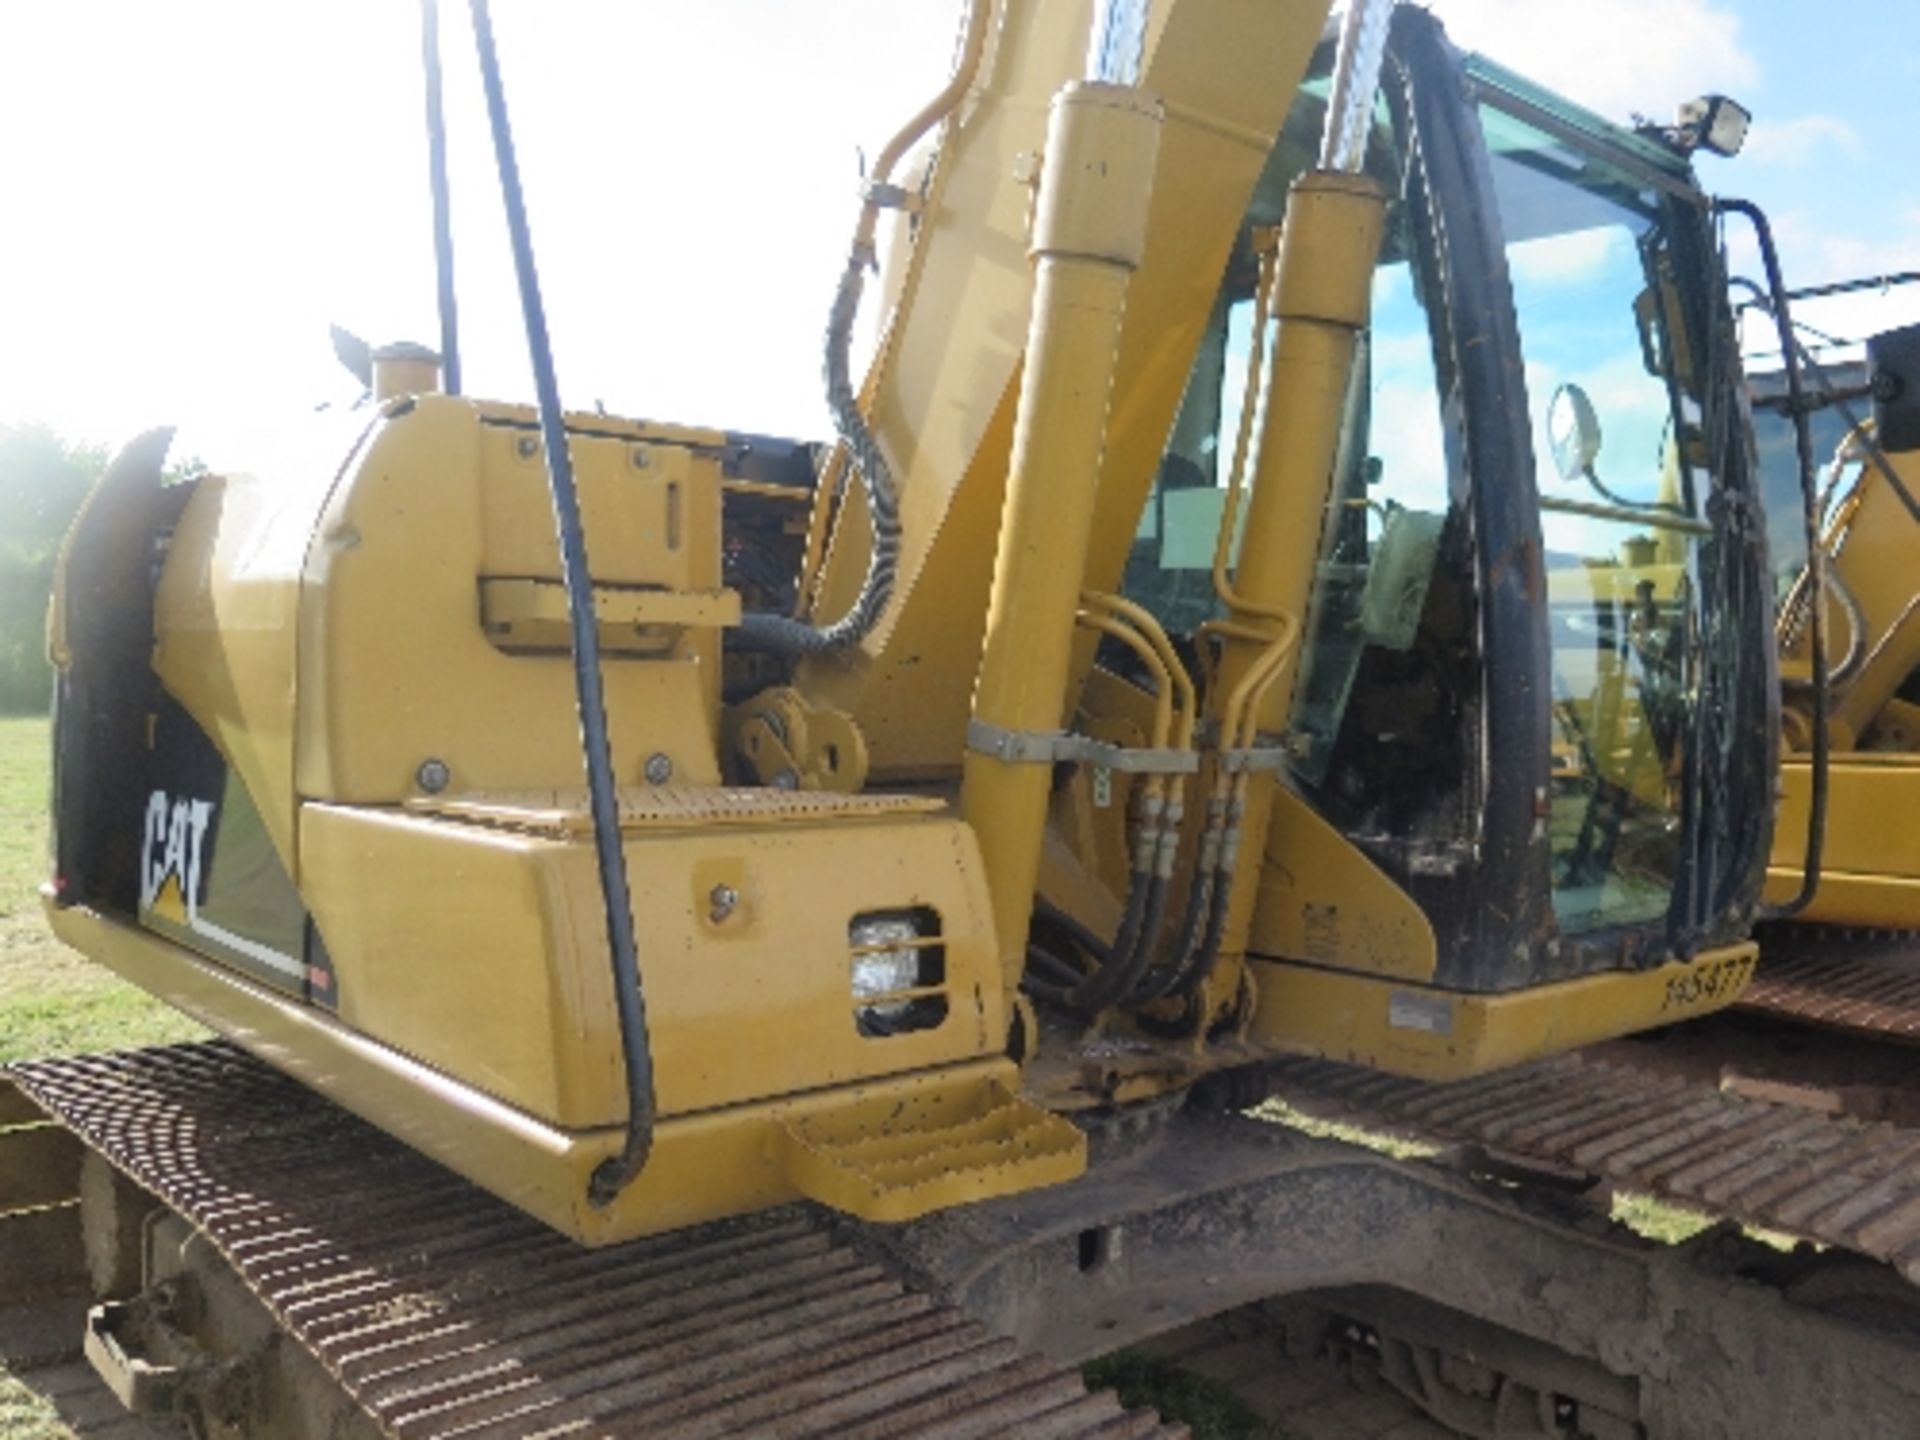 Caterpillar 312C excavator 4331 hrs 2006 145477
CANOPY DAMAGE
ONE SIDE POOR TRACKING FORWARD - - Image 6 of 9